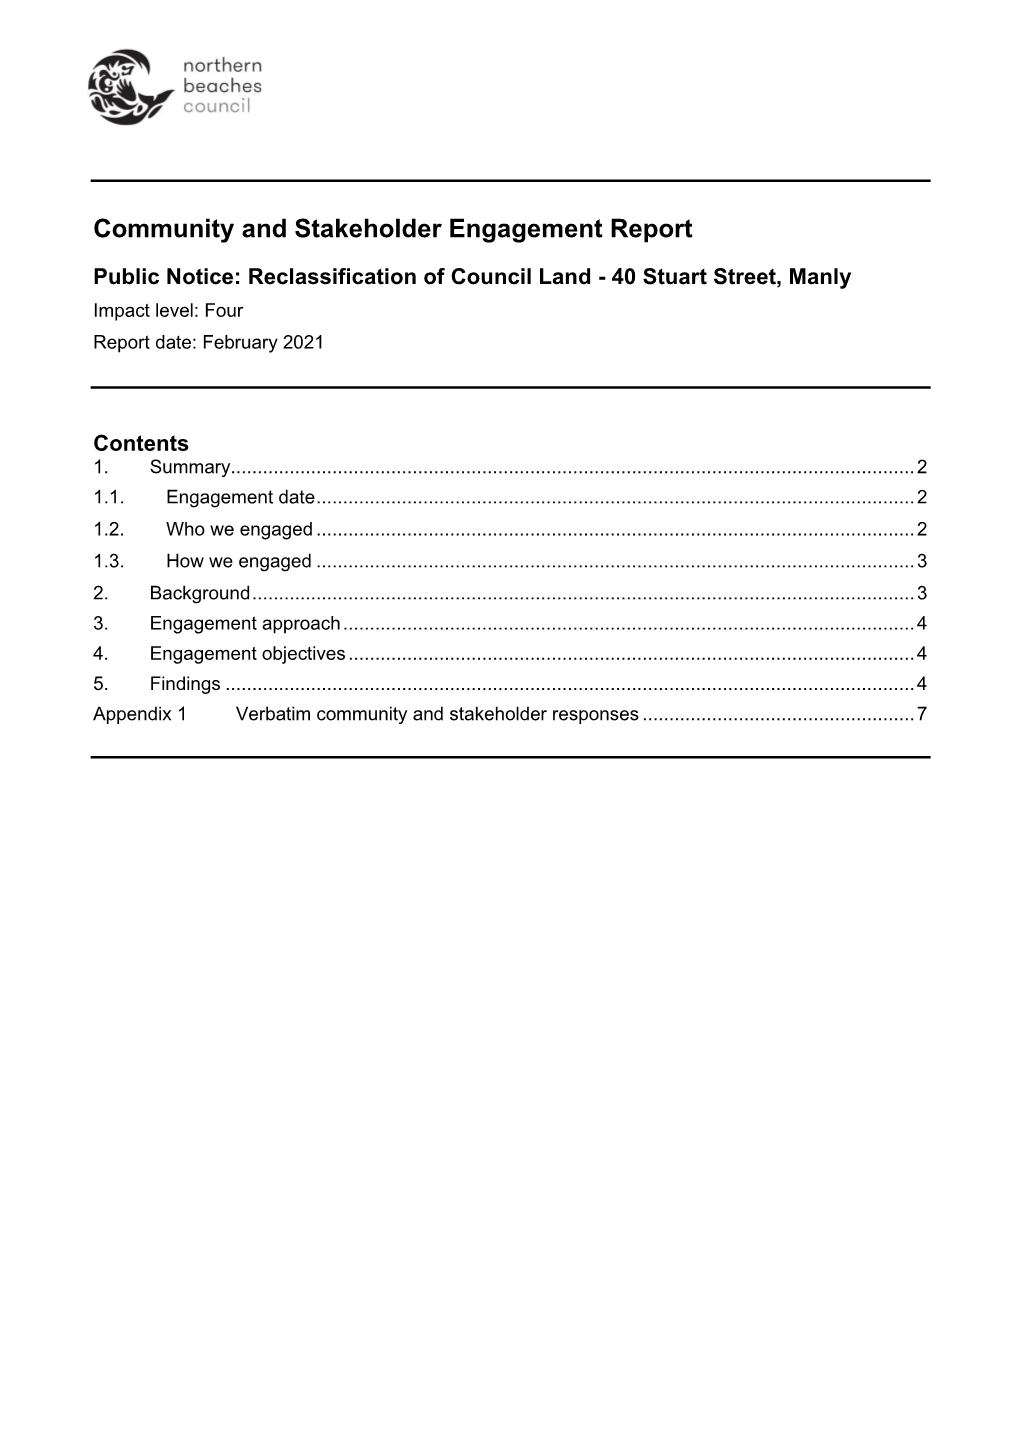 Community and Stakeholder Report